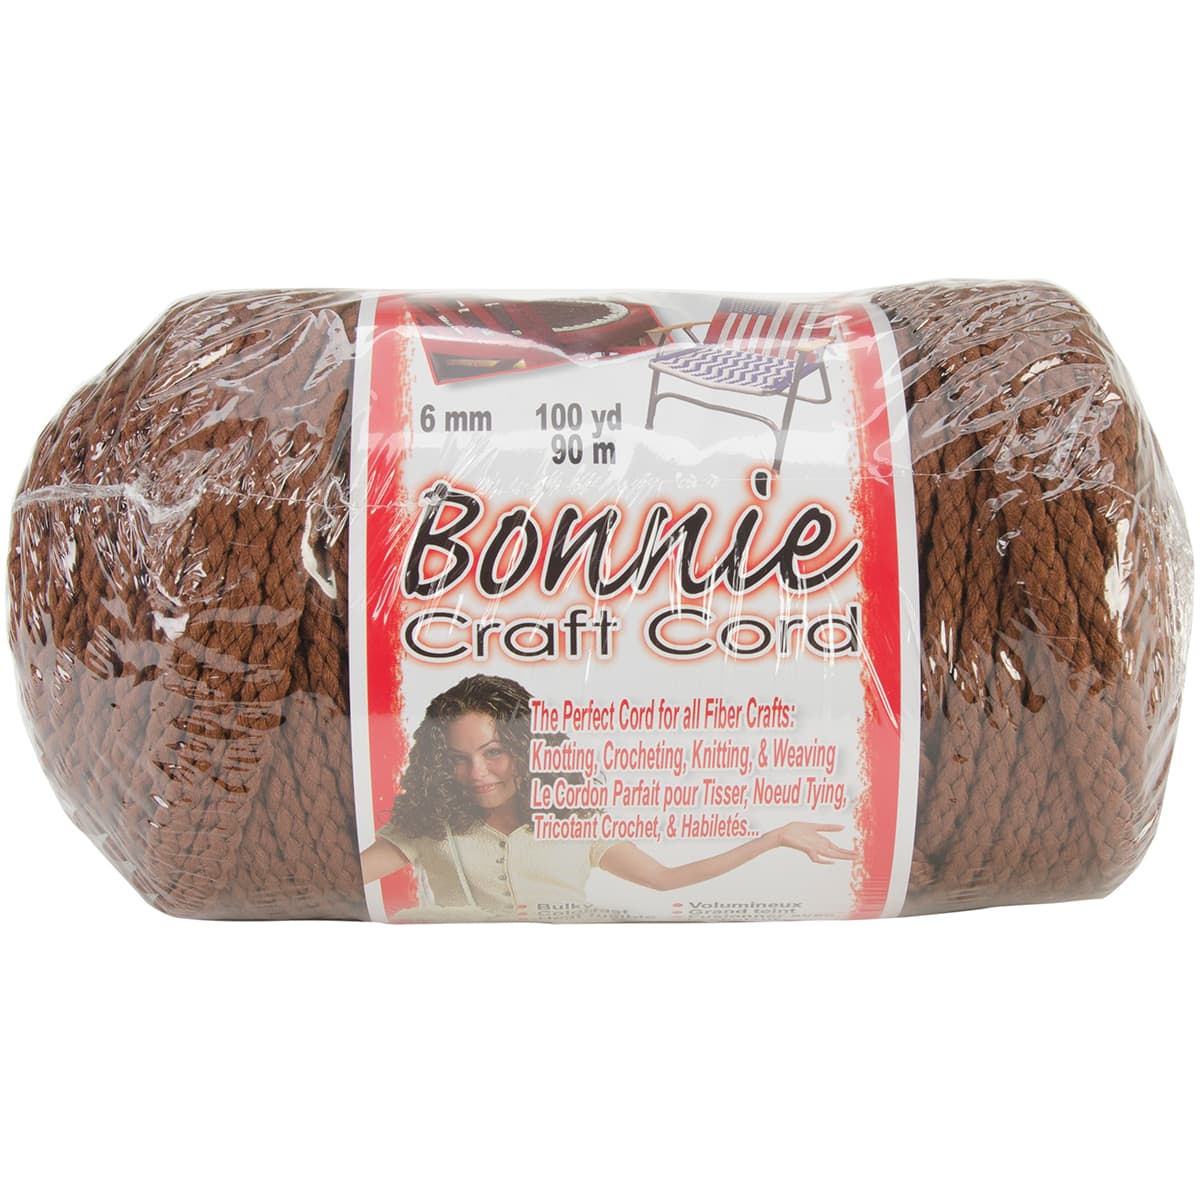 Bonnie 6mm Crafting Cord in Fun Solid & Pattern Colors, Knitting